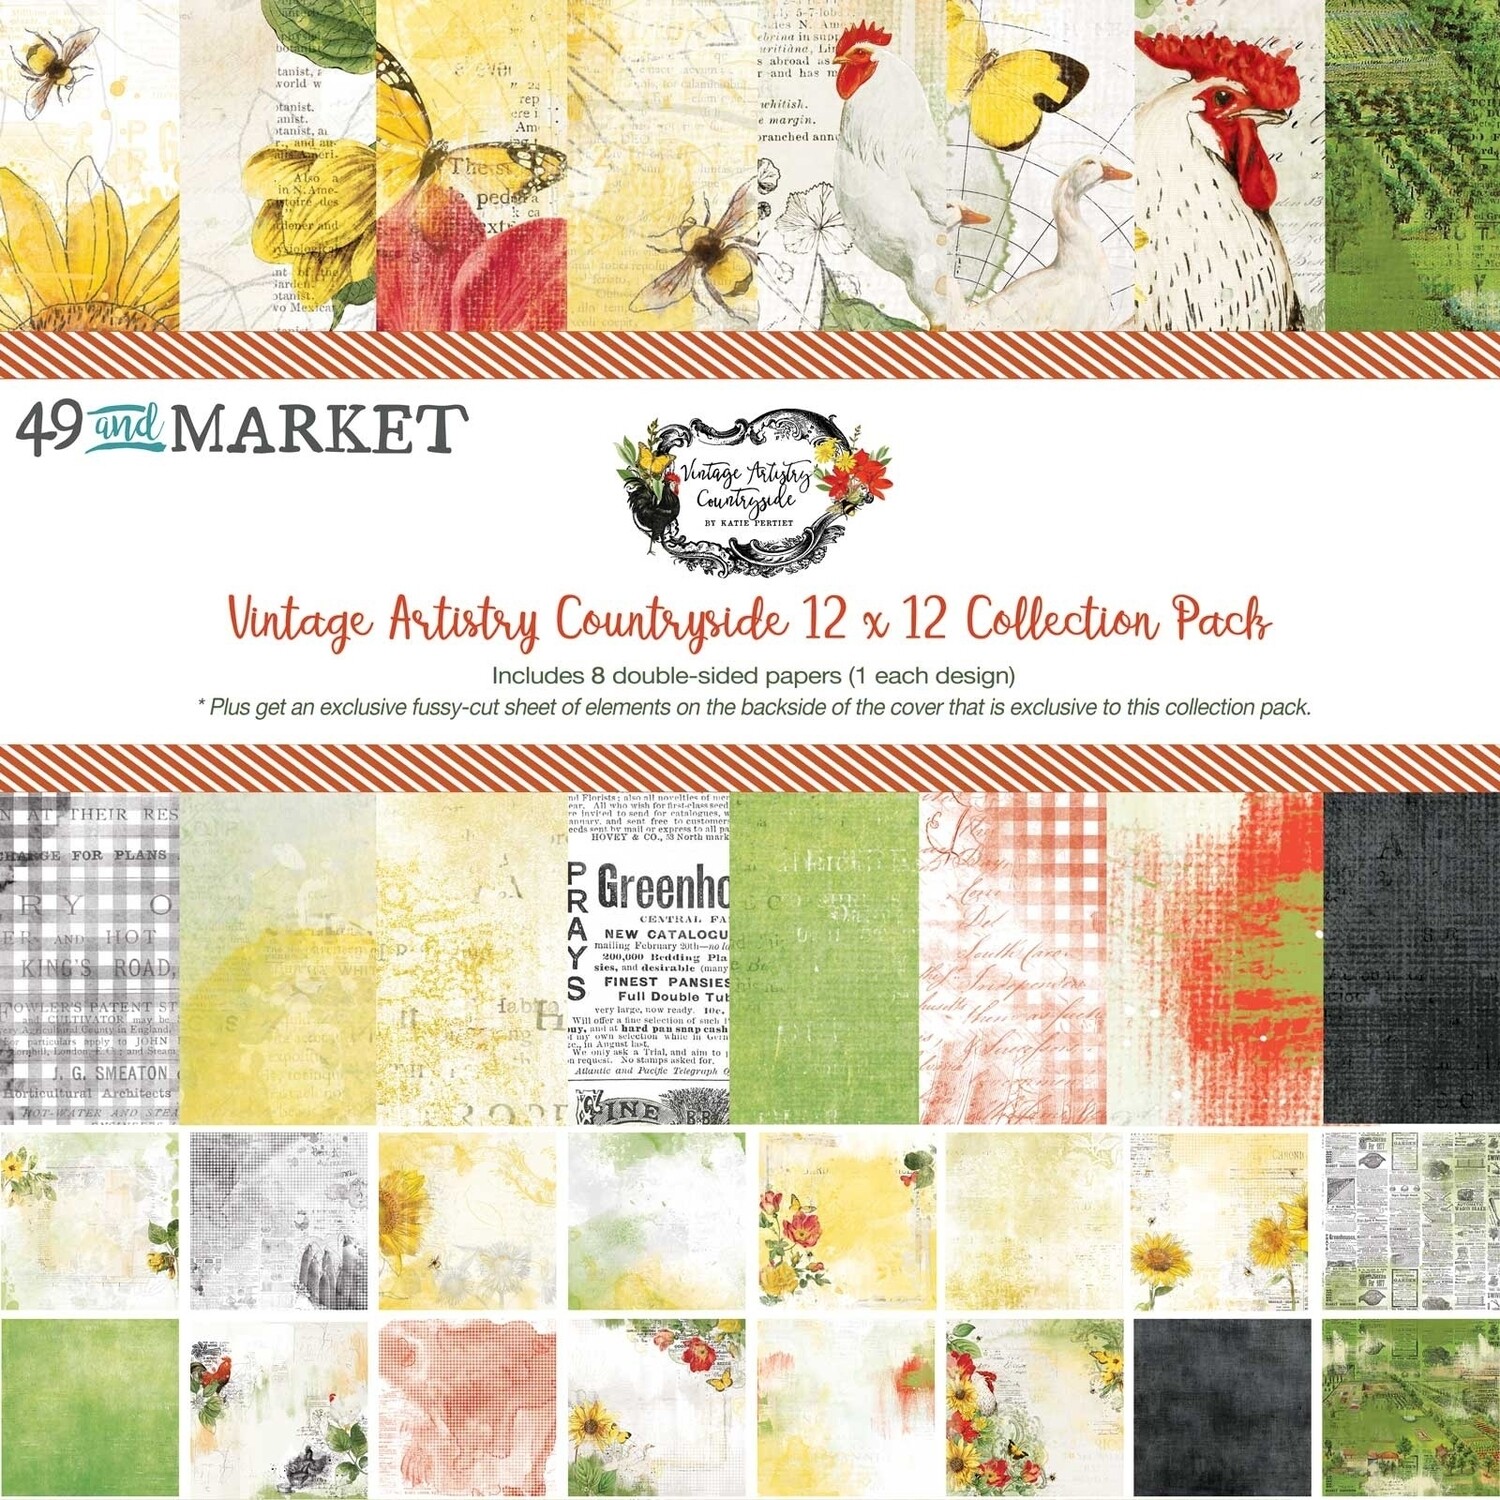 countryside 12 x12 Collection pack